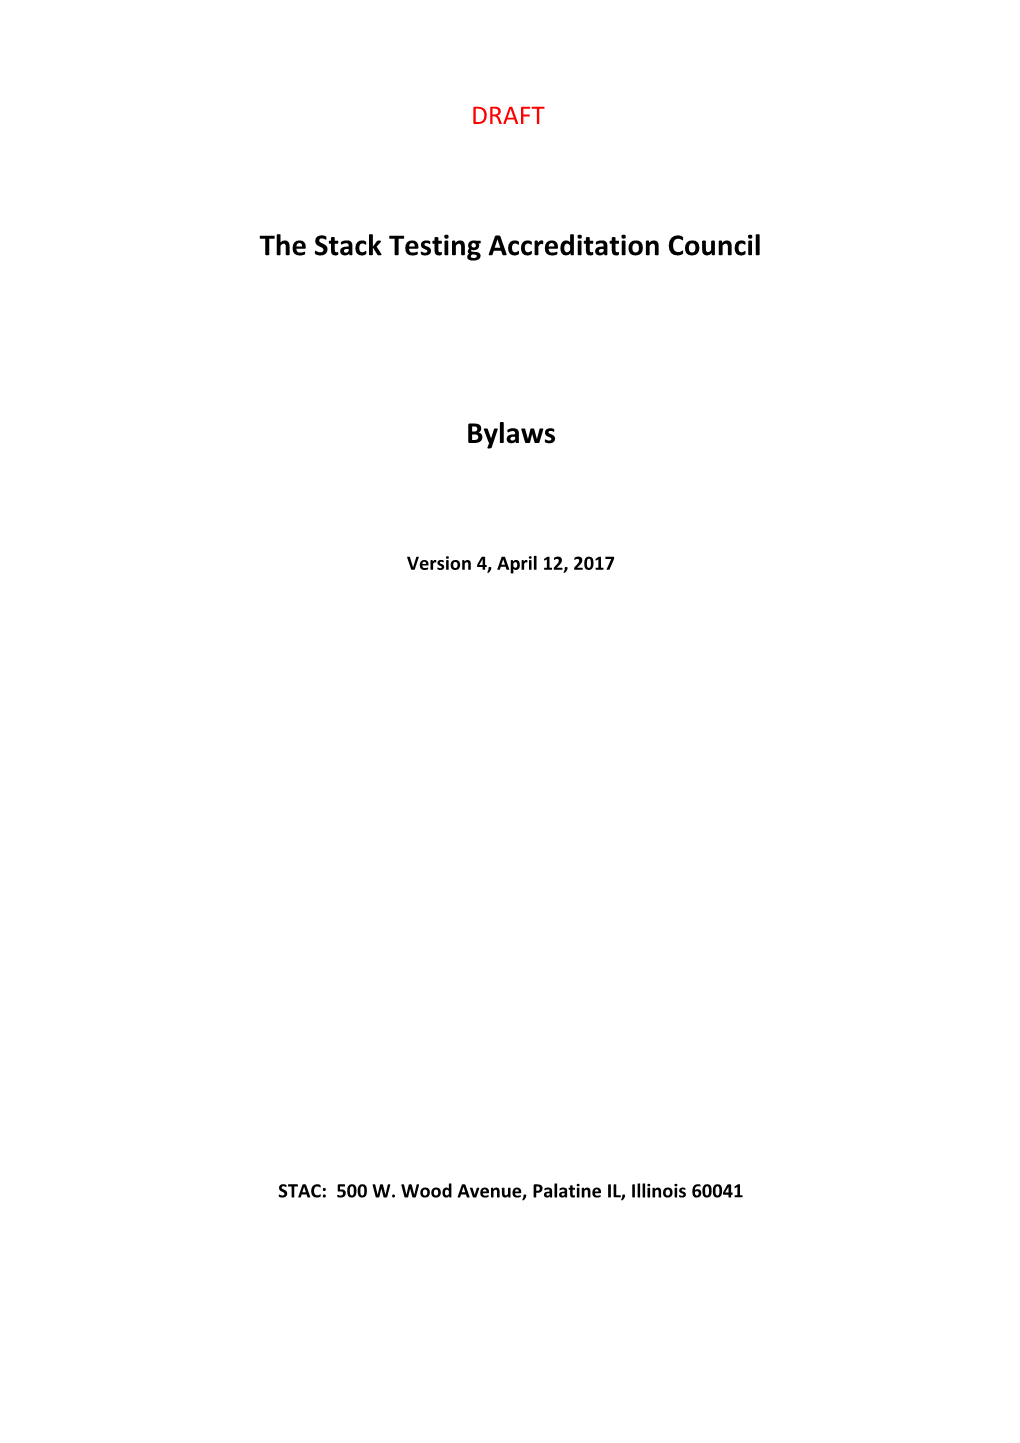 The Stack Testing Accreditation Council